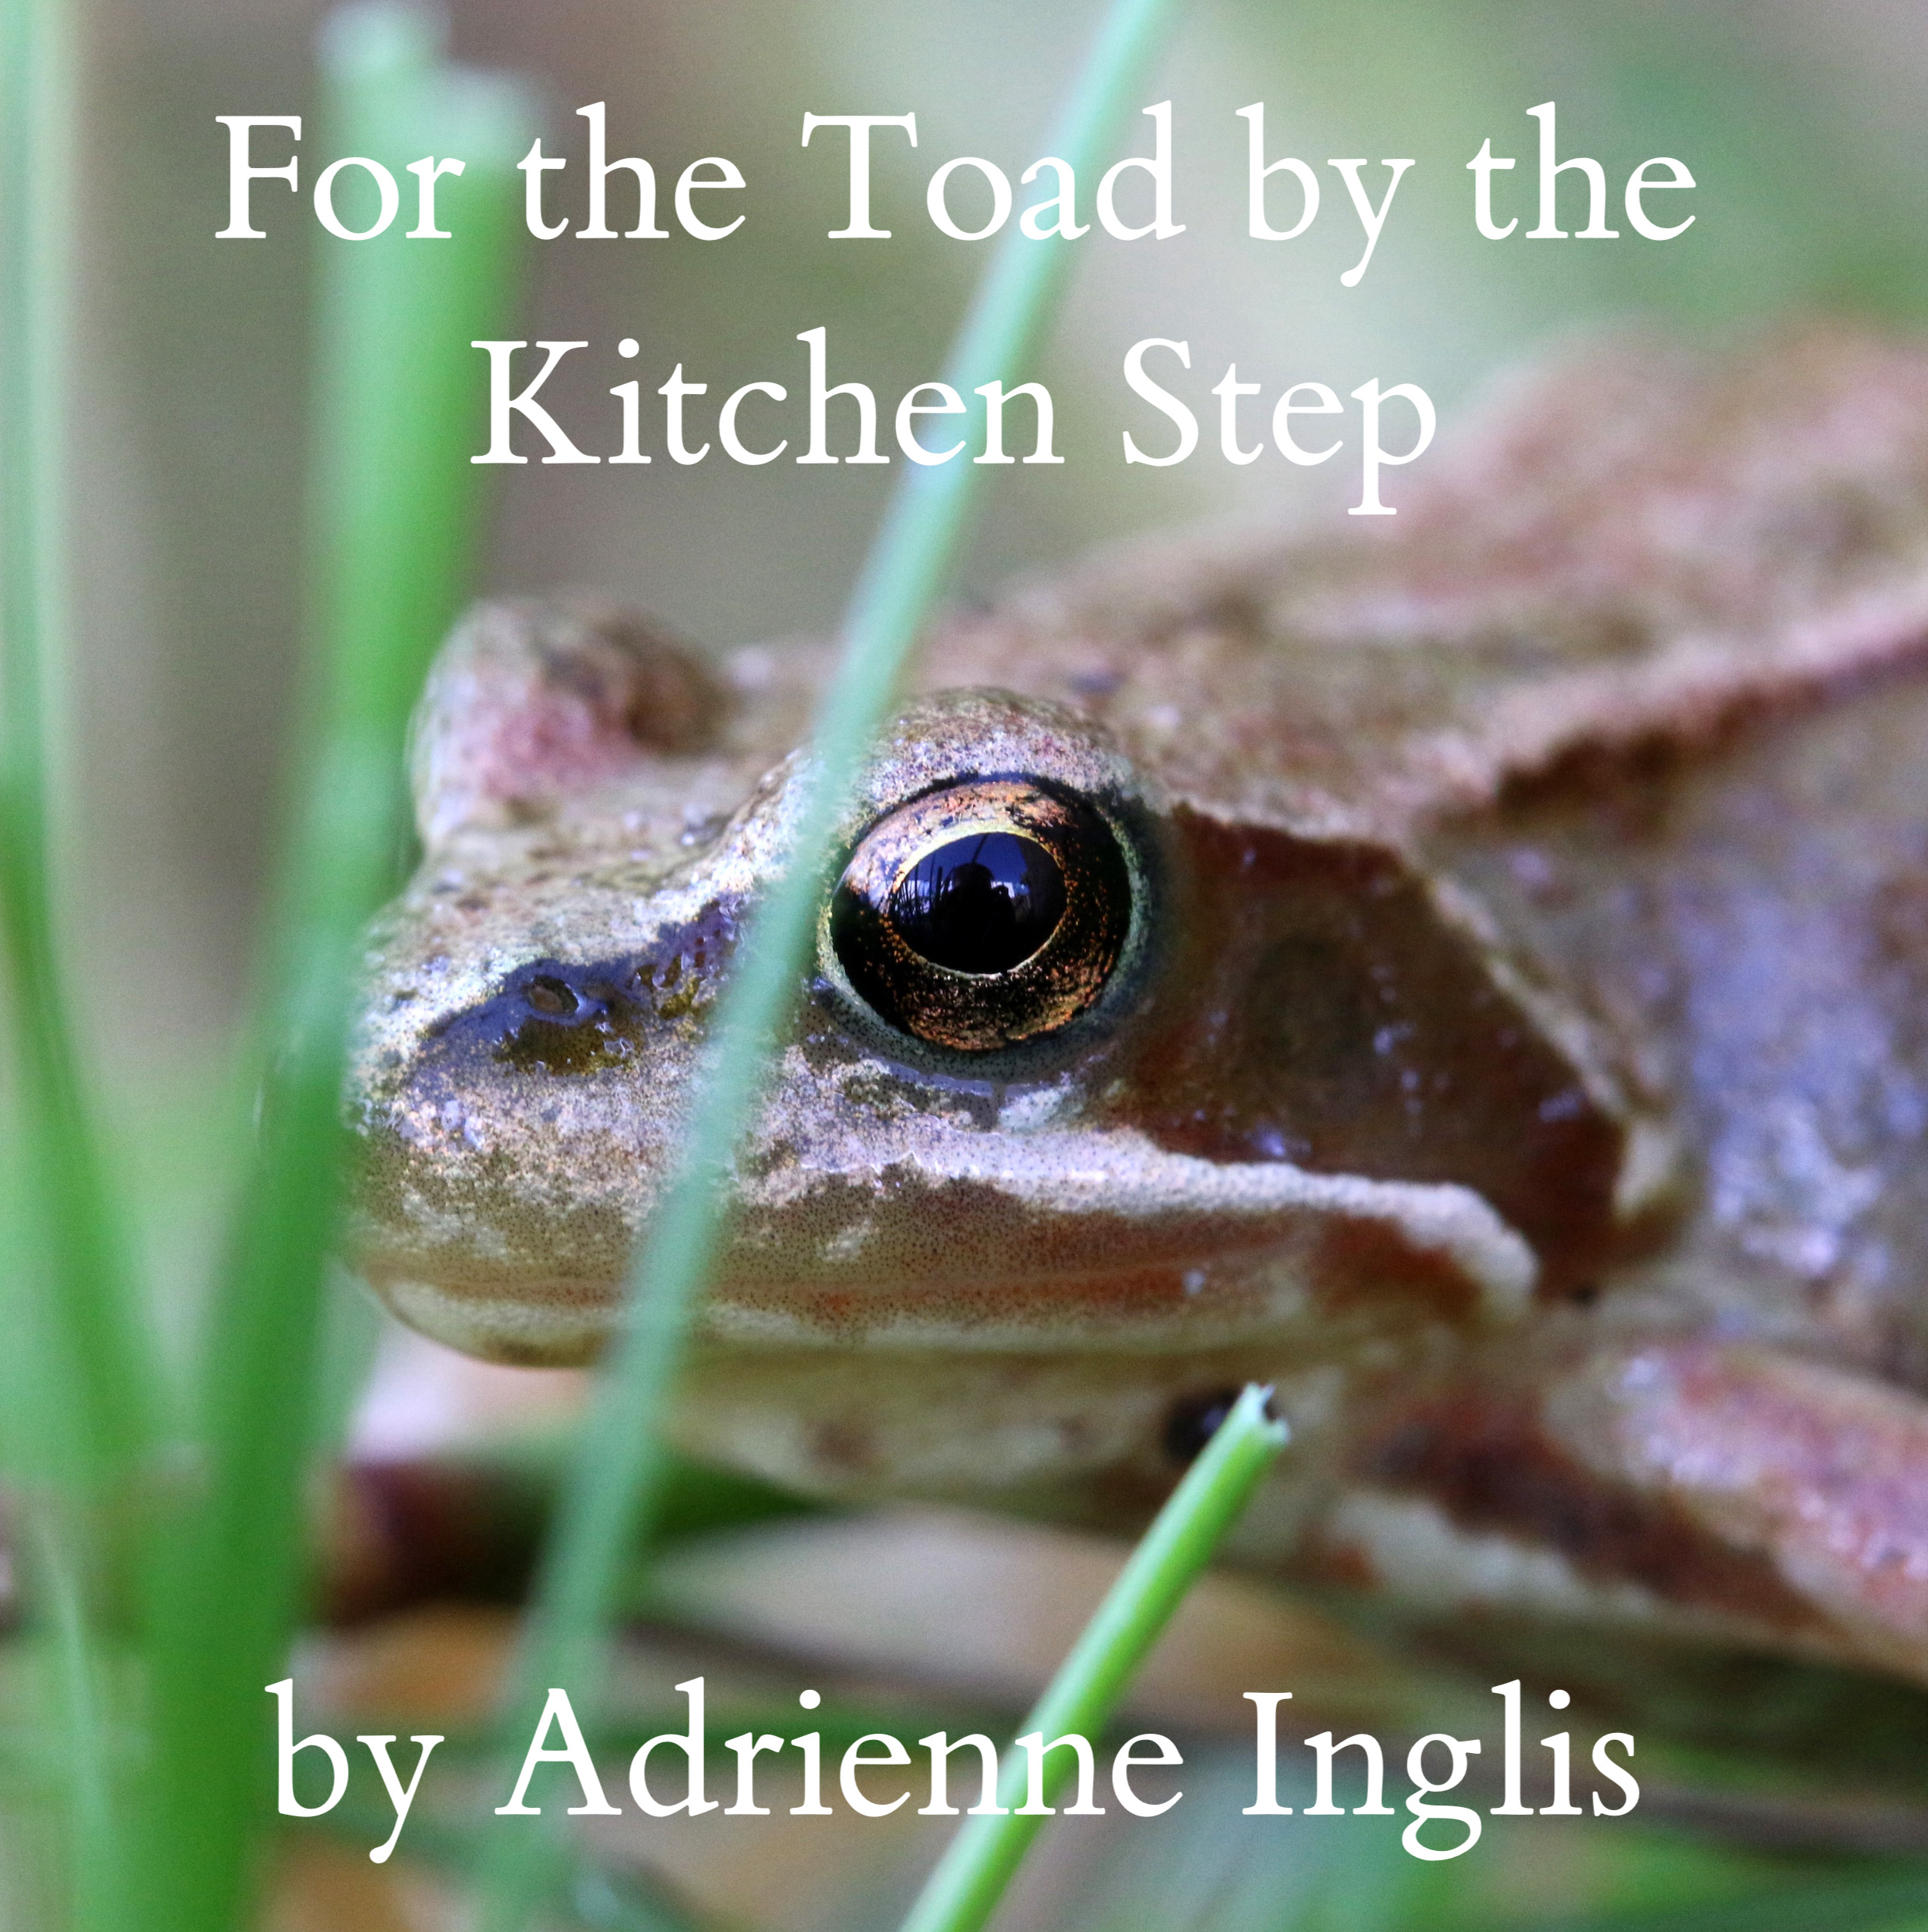 For the Toad by the Kitchen Step